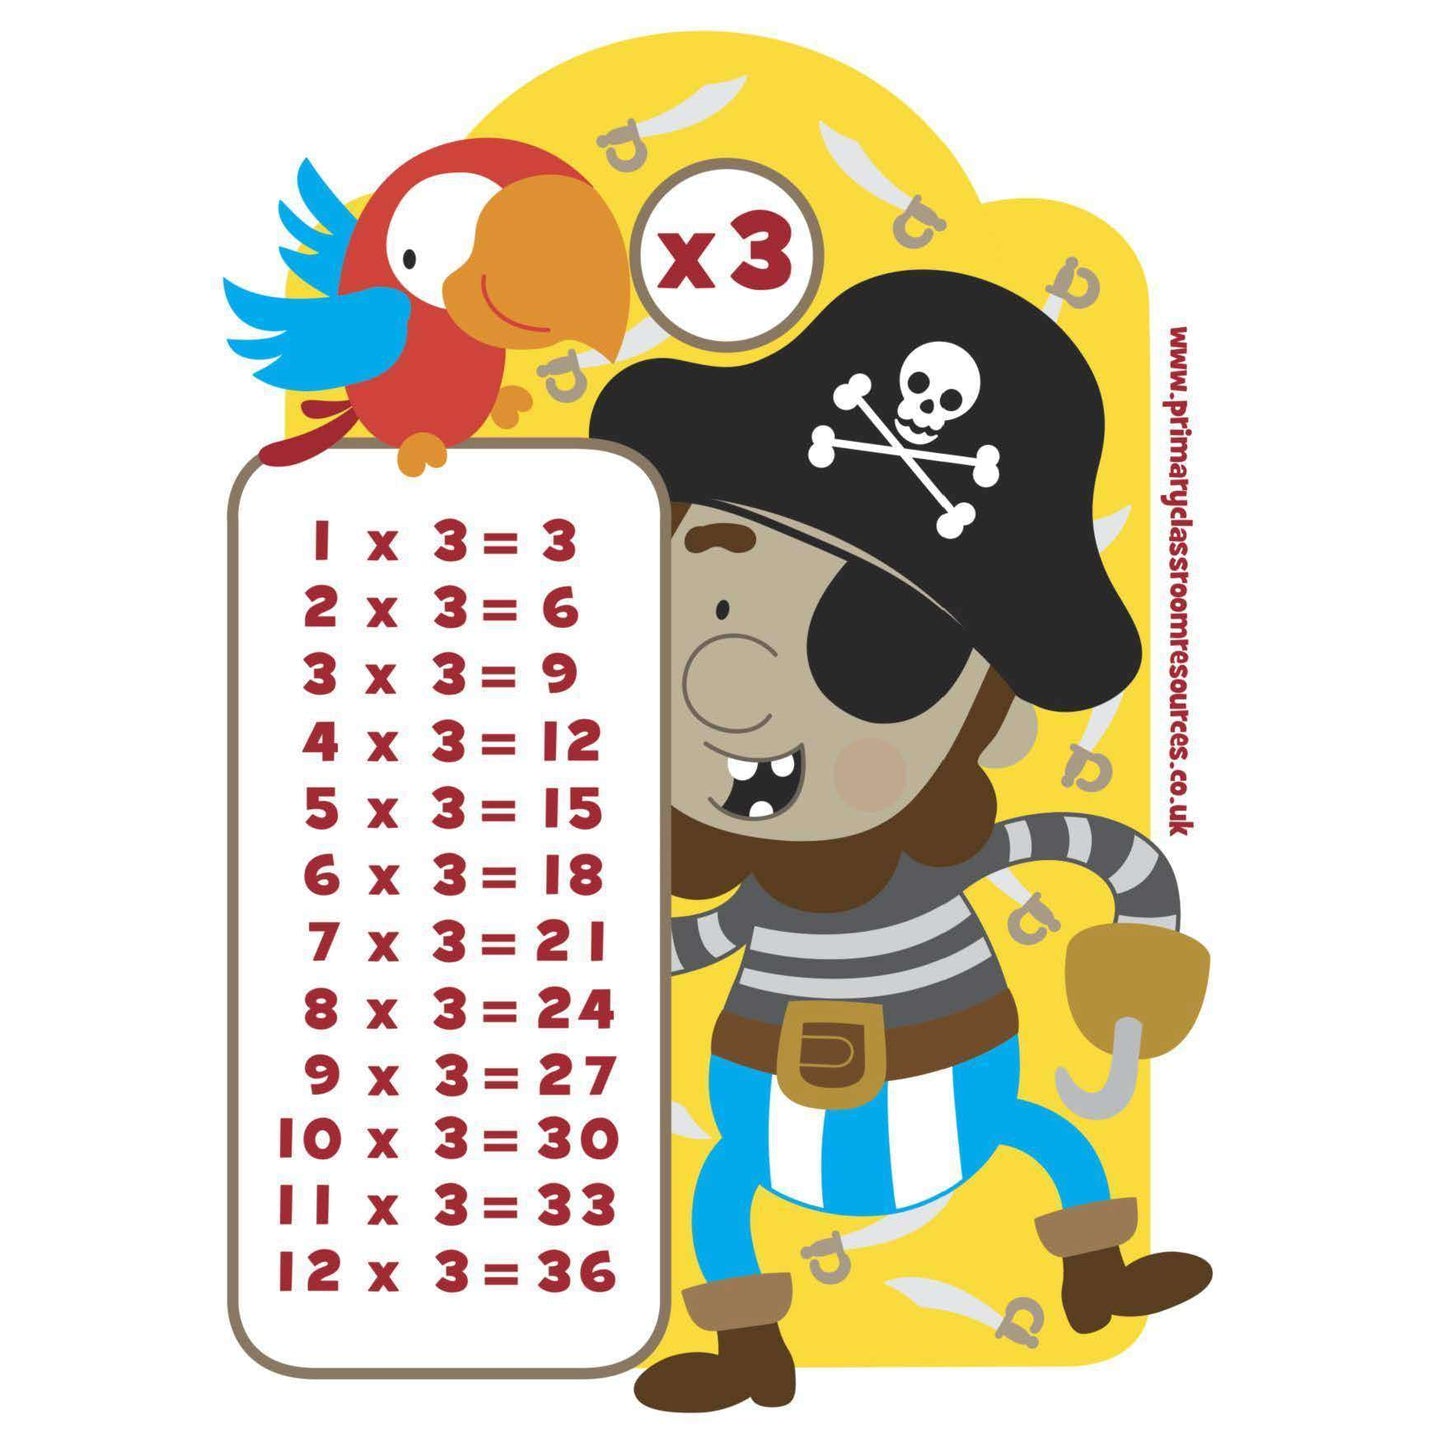 Pirate Tables Posters:Primary Classroom Resources